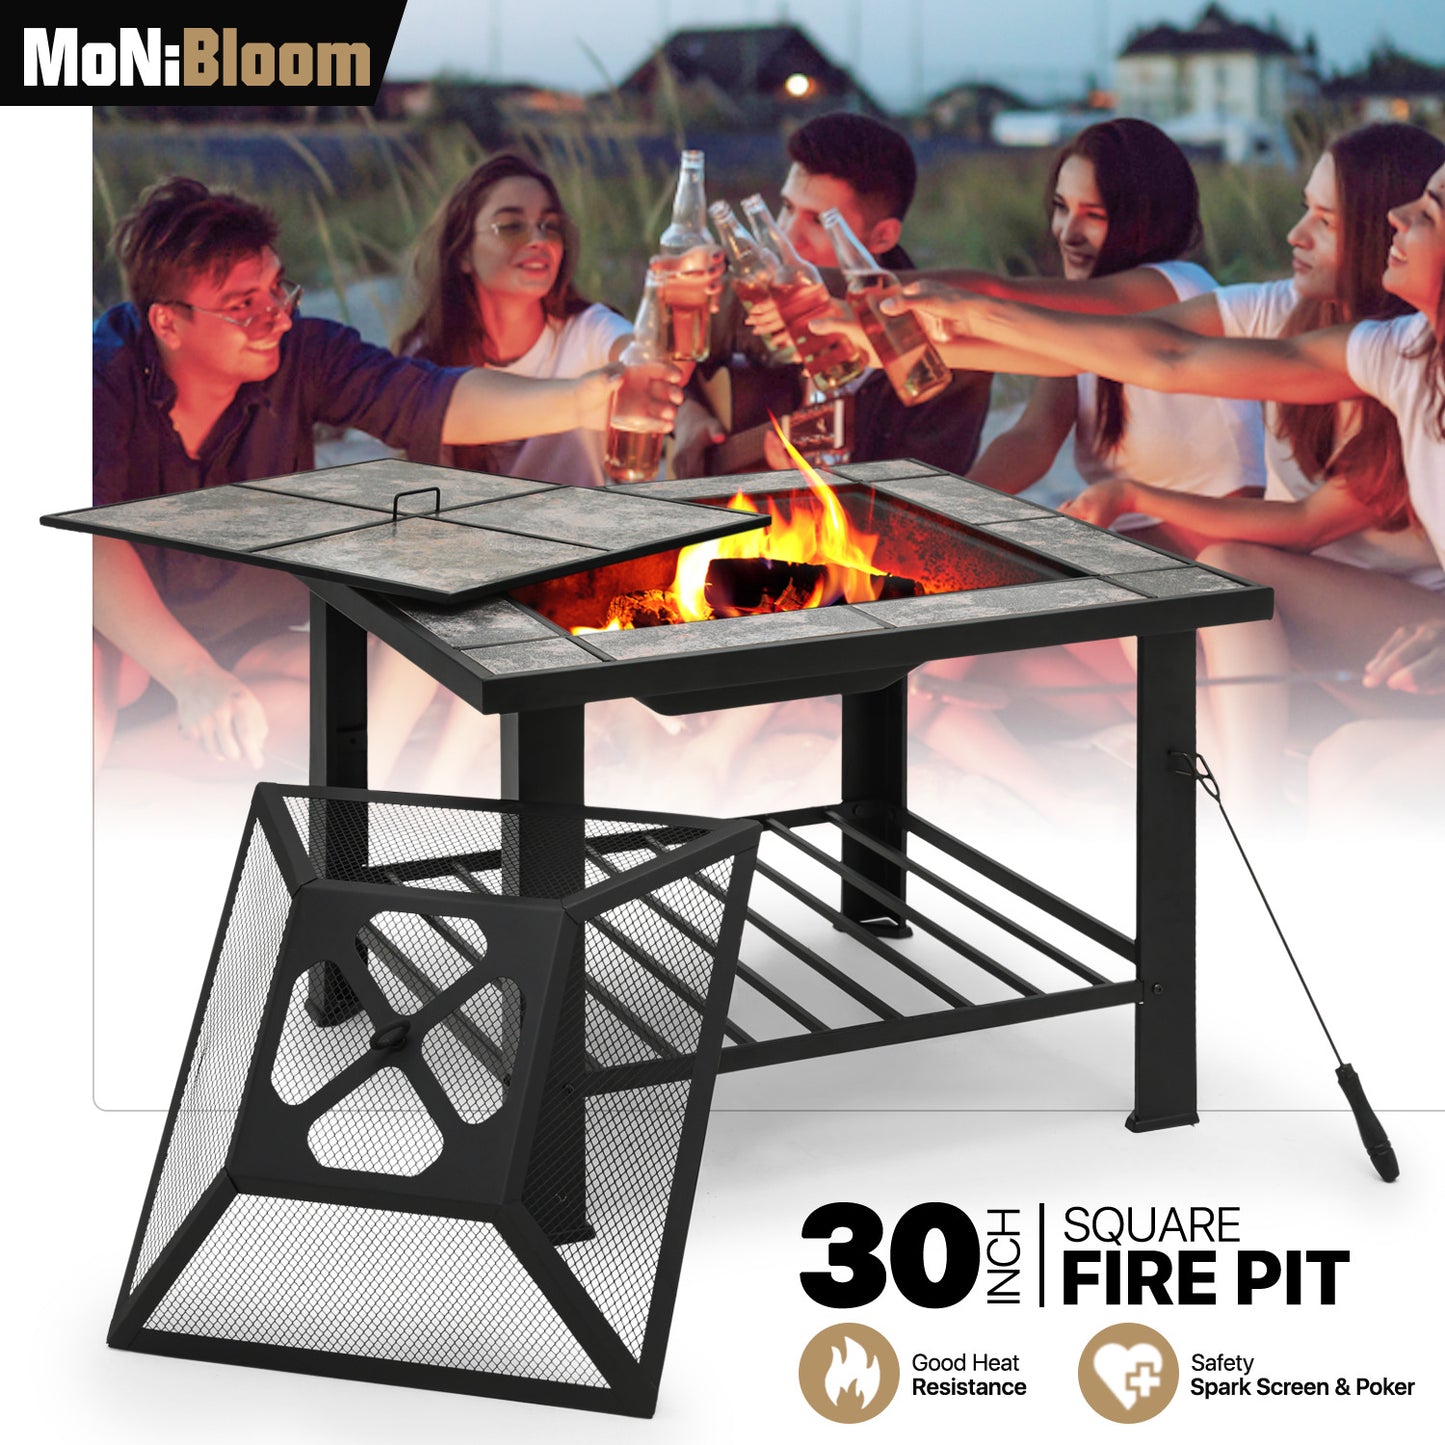 30" Square Marble Tabletop Fire Pit Table w/Lid & Poker & Spark Screen